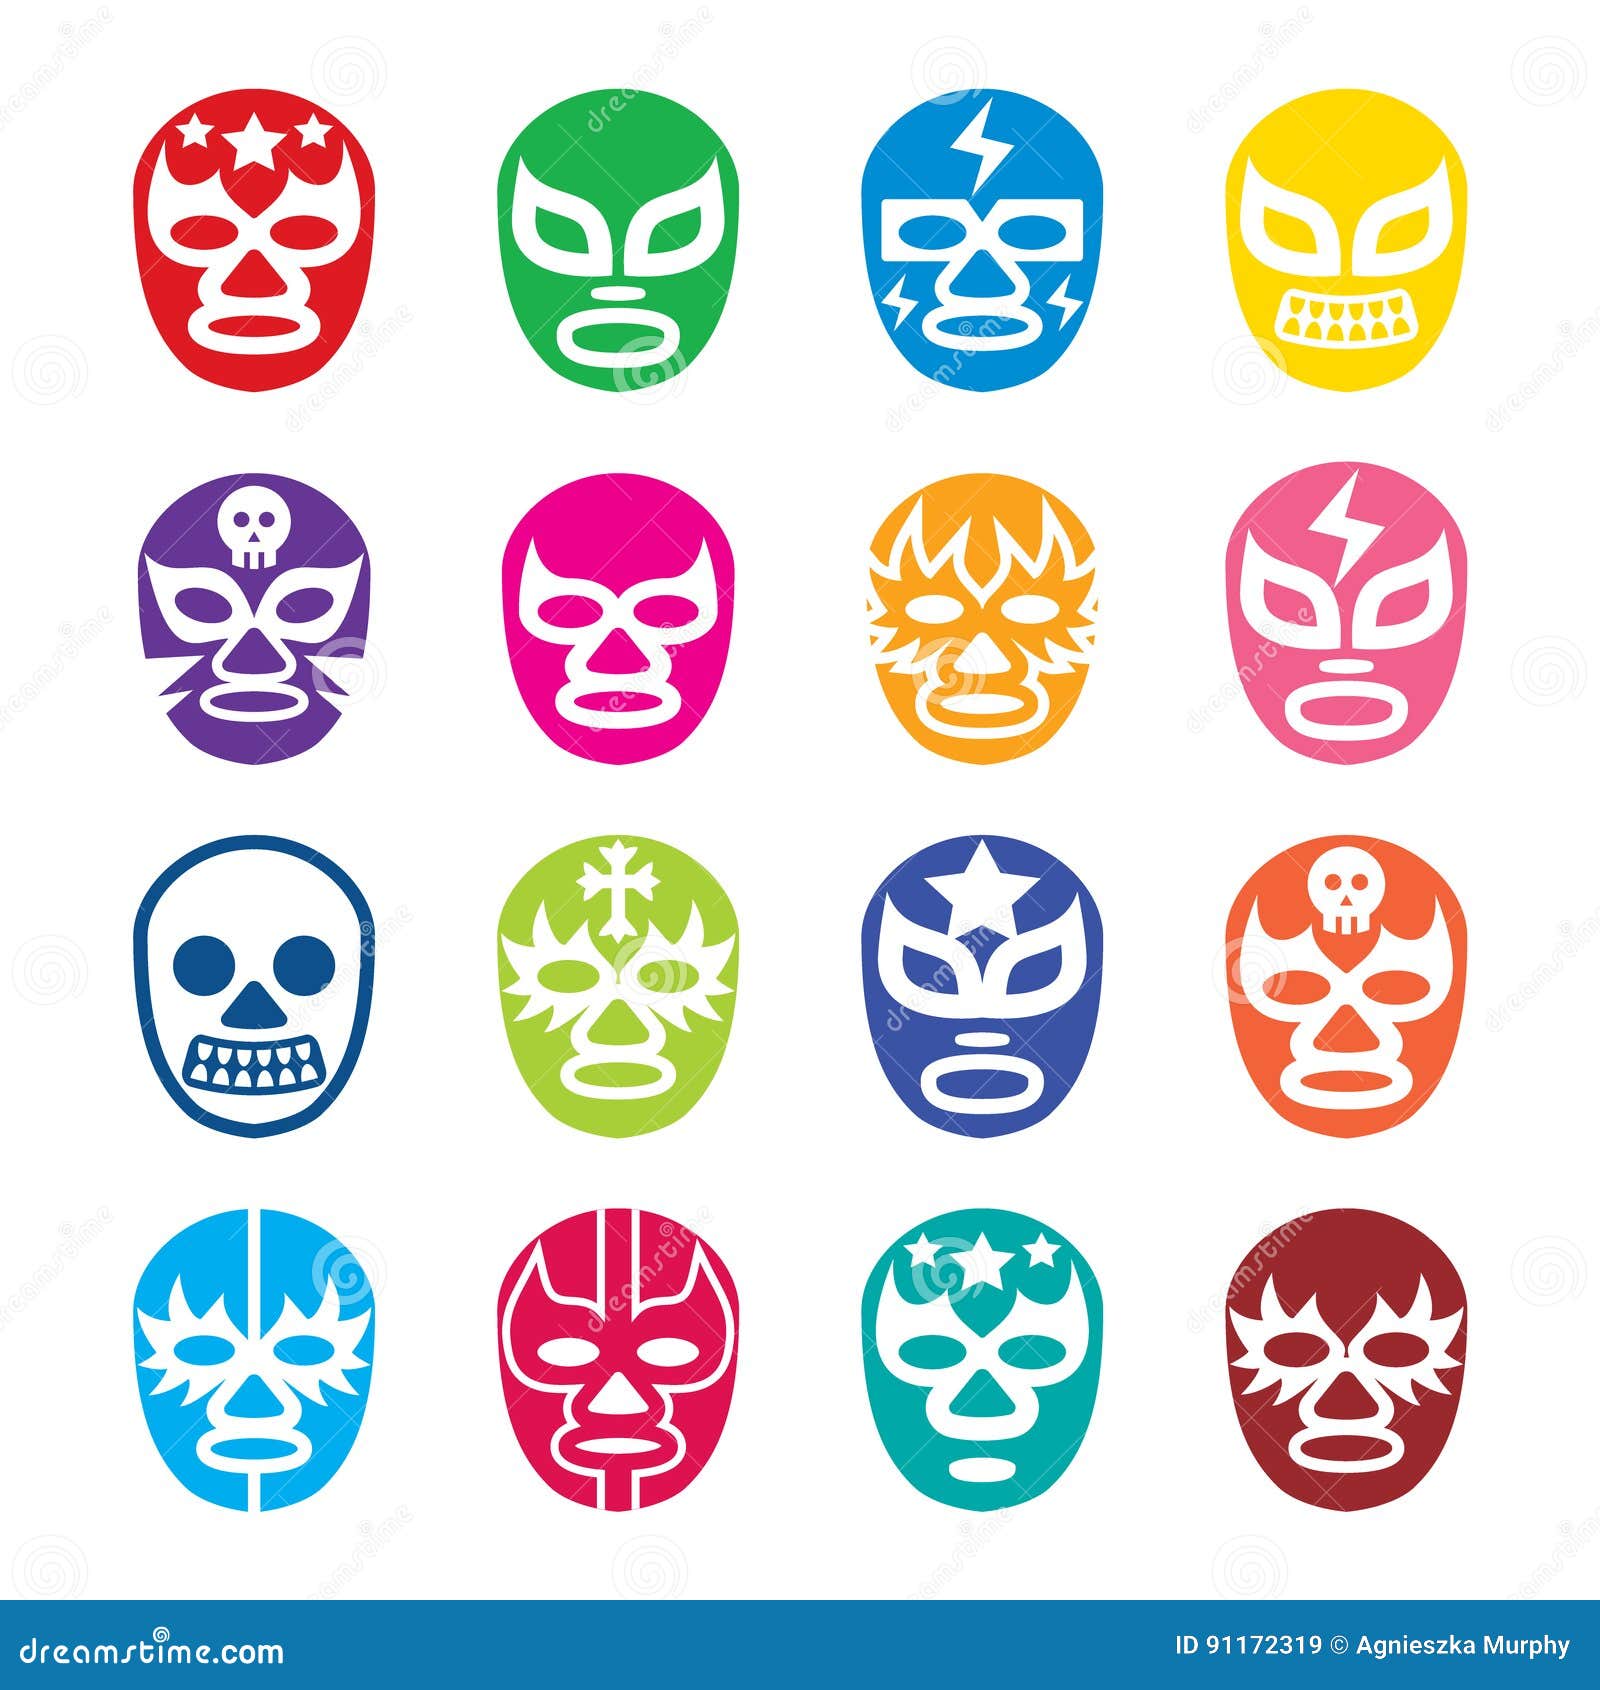 lucha libre, luchador icons, mexican wrestling masks